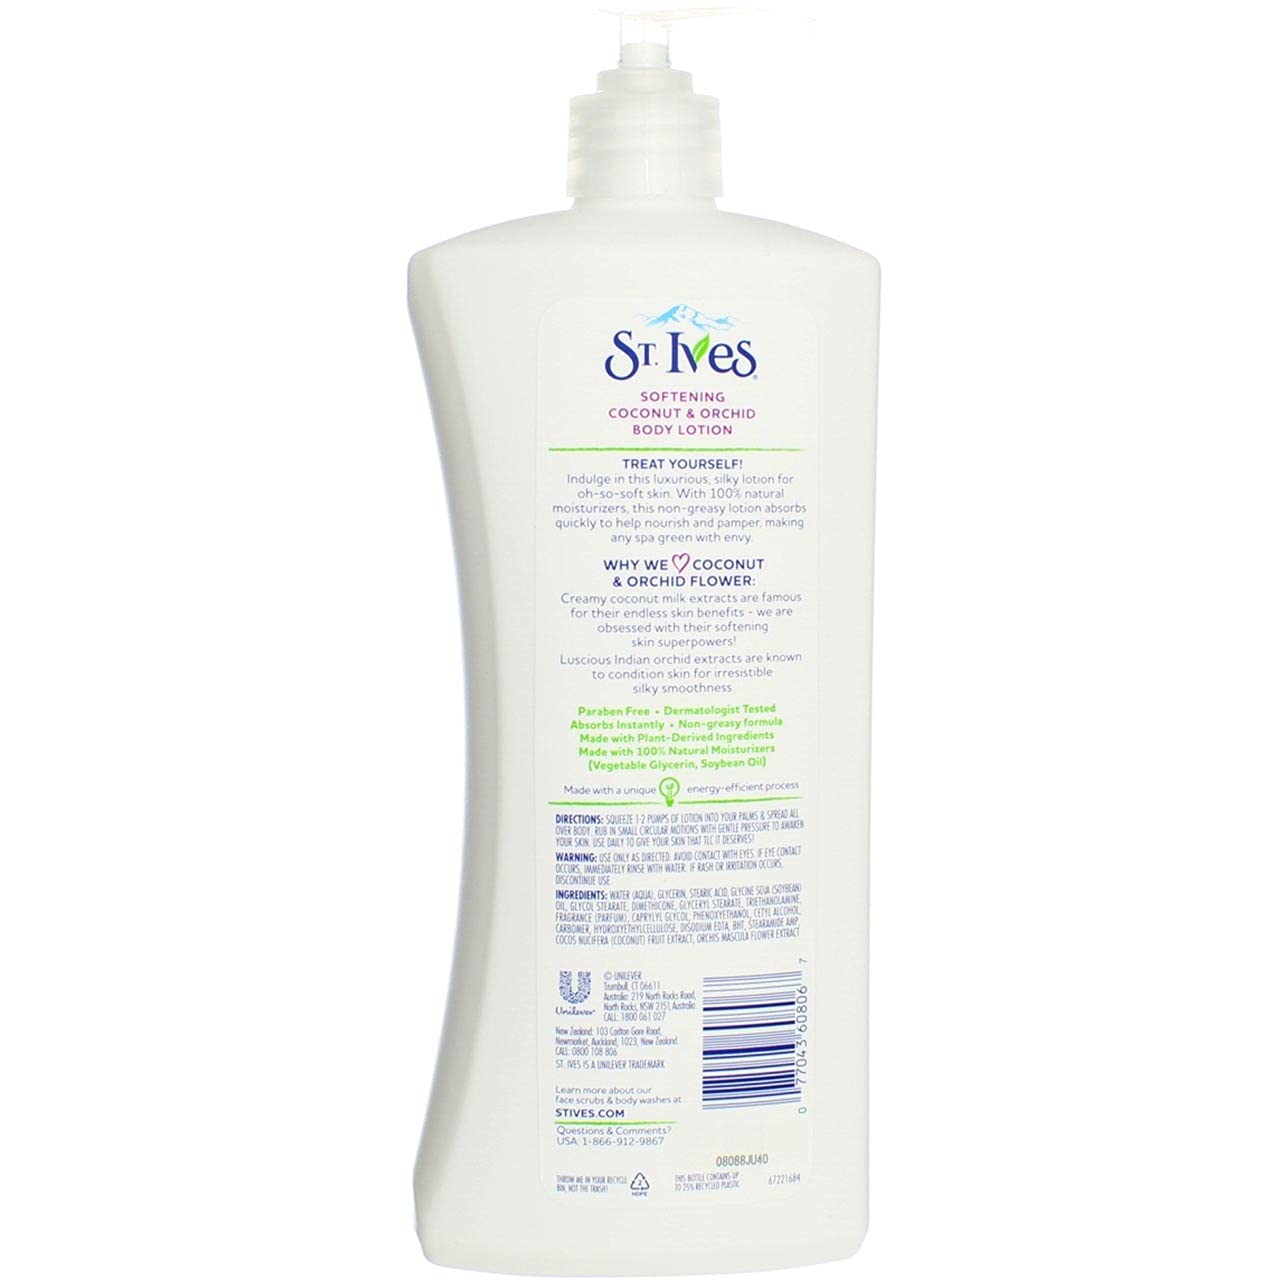 St Ives Softening Coconut and Orchid Body Lotion, 21 Oz - image 5 of 8